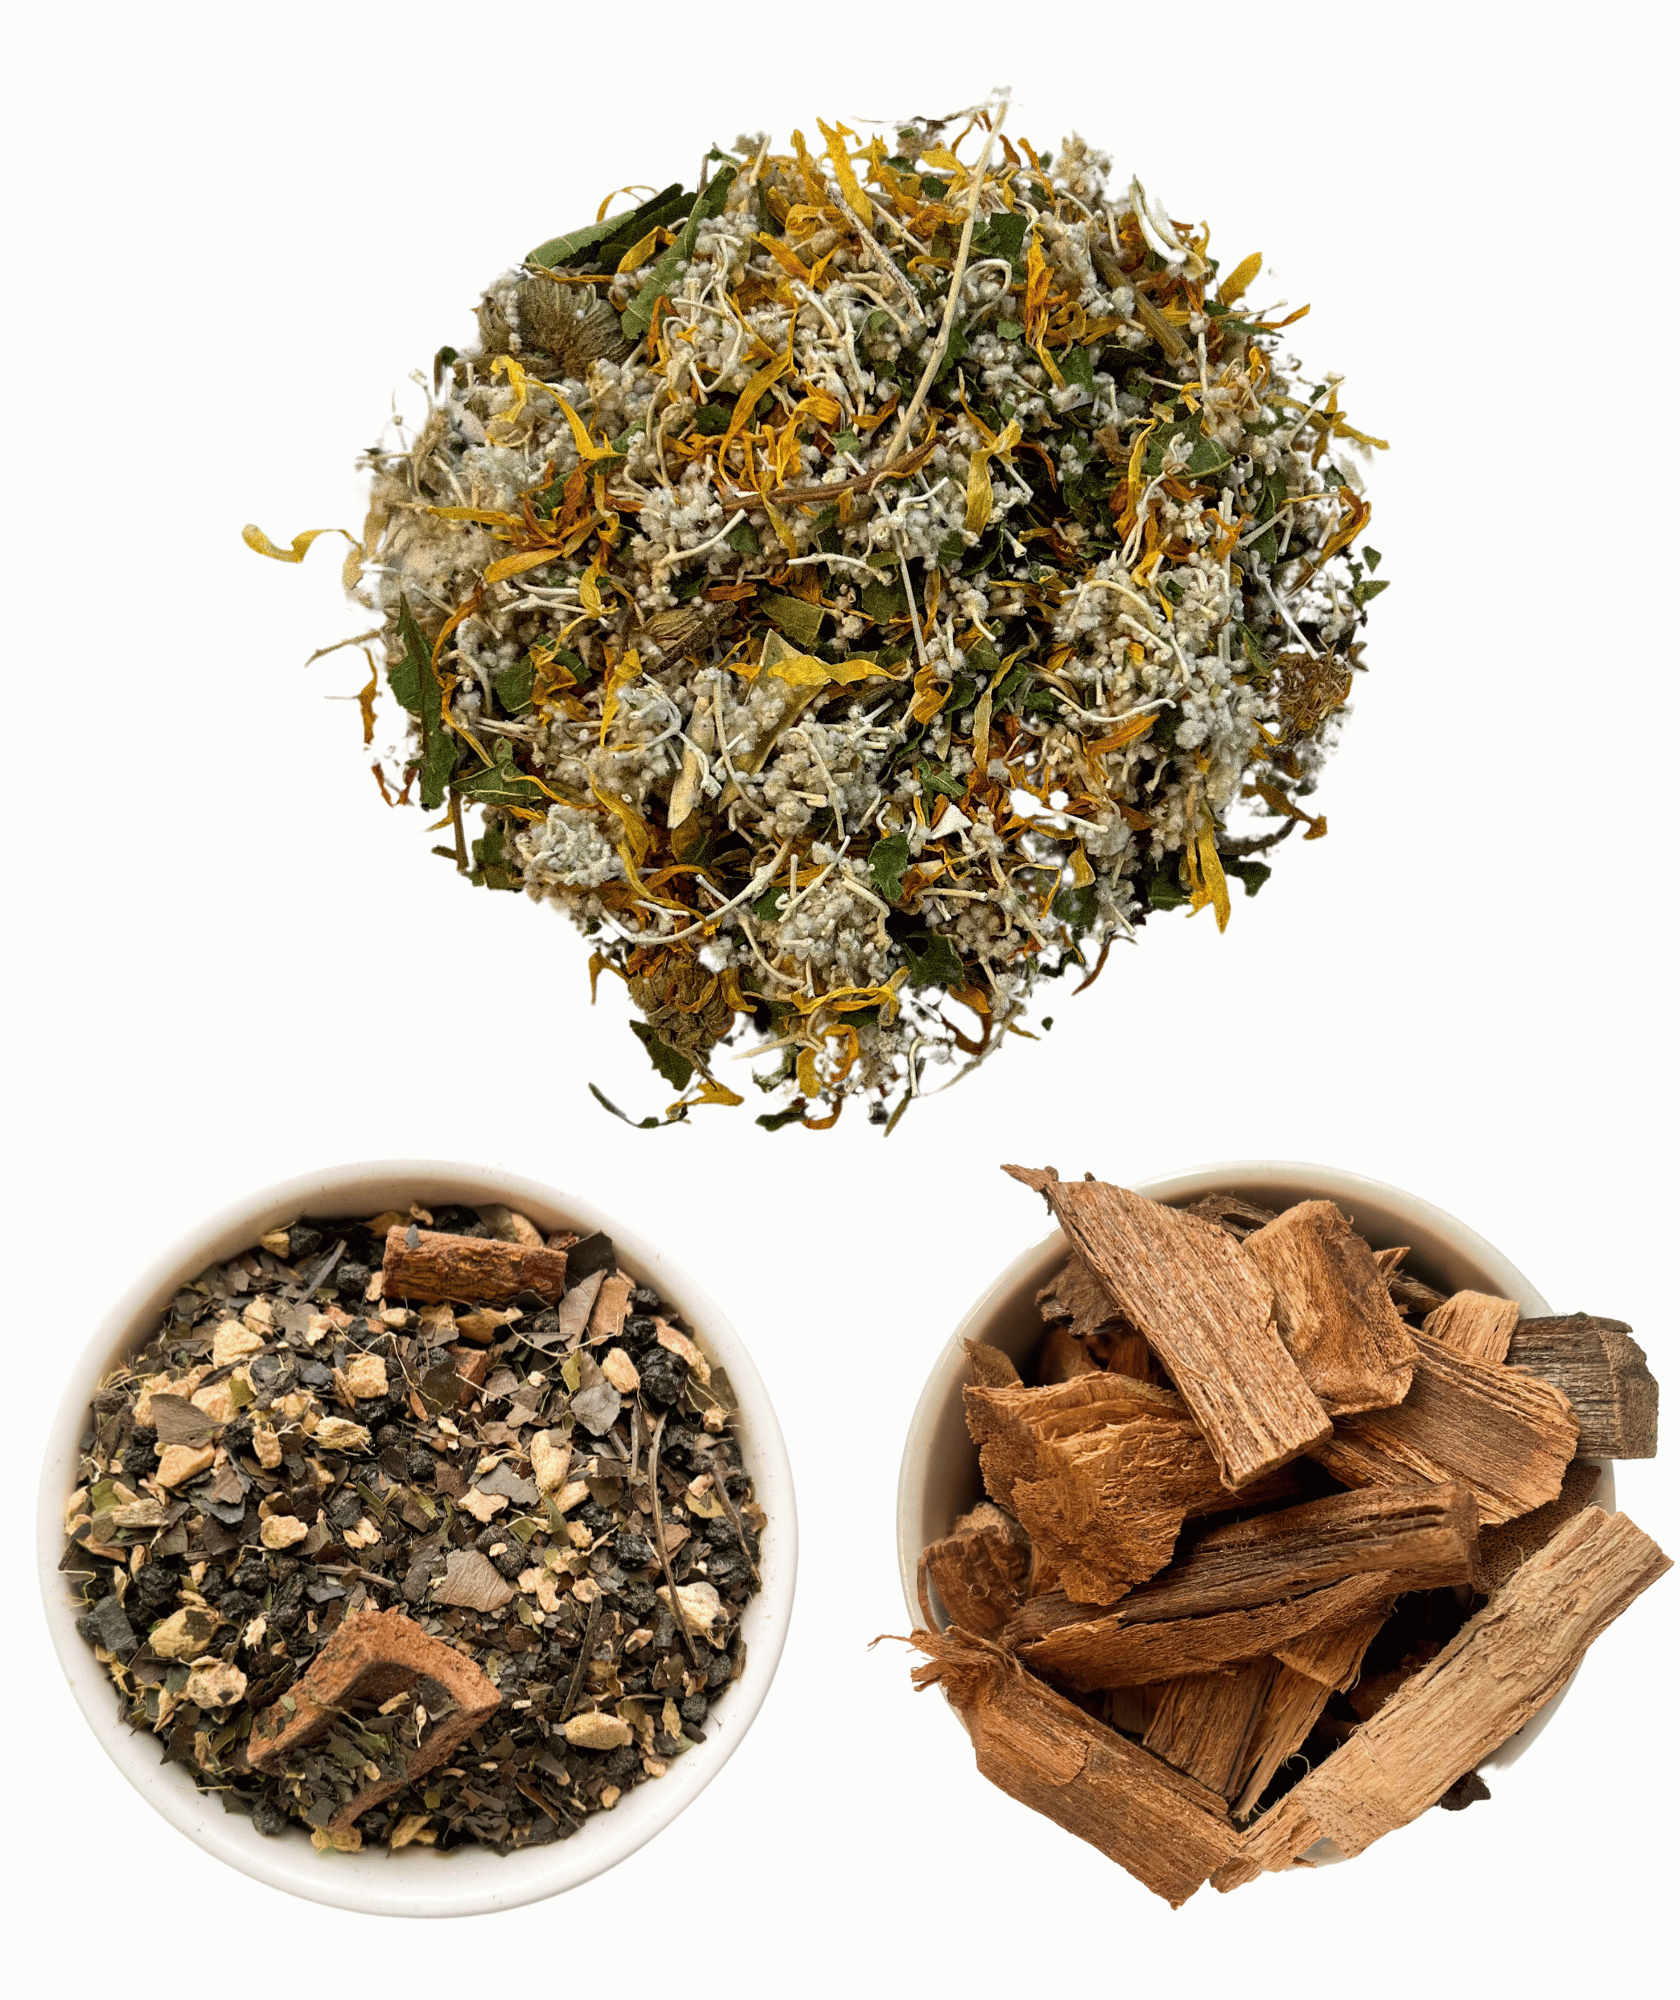 Herbal blend which includes: Clavo Huasca, Zapped In and Sacred Sacral.